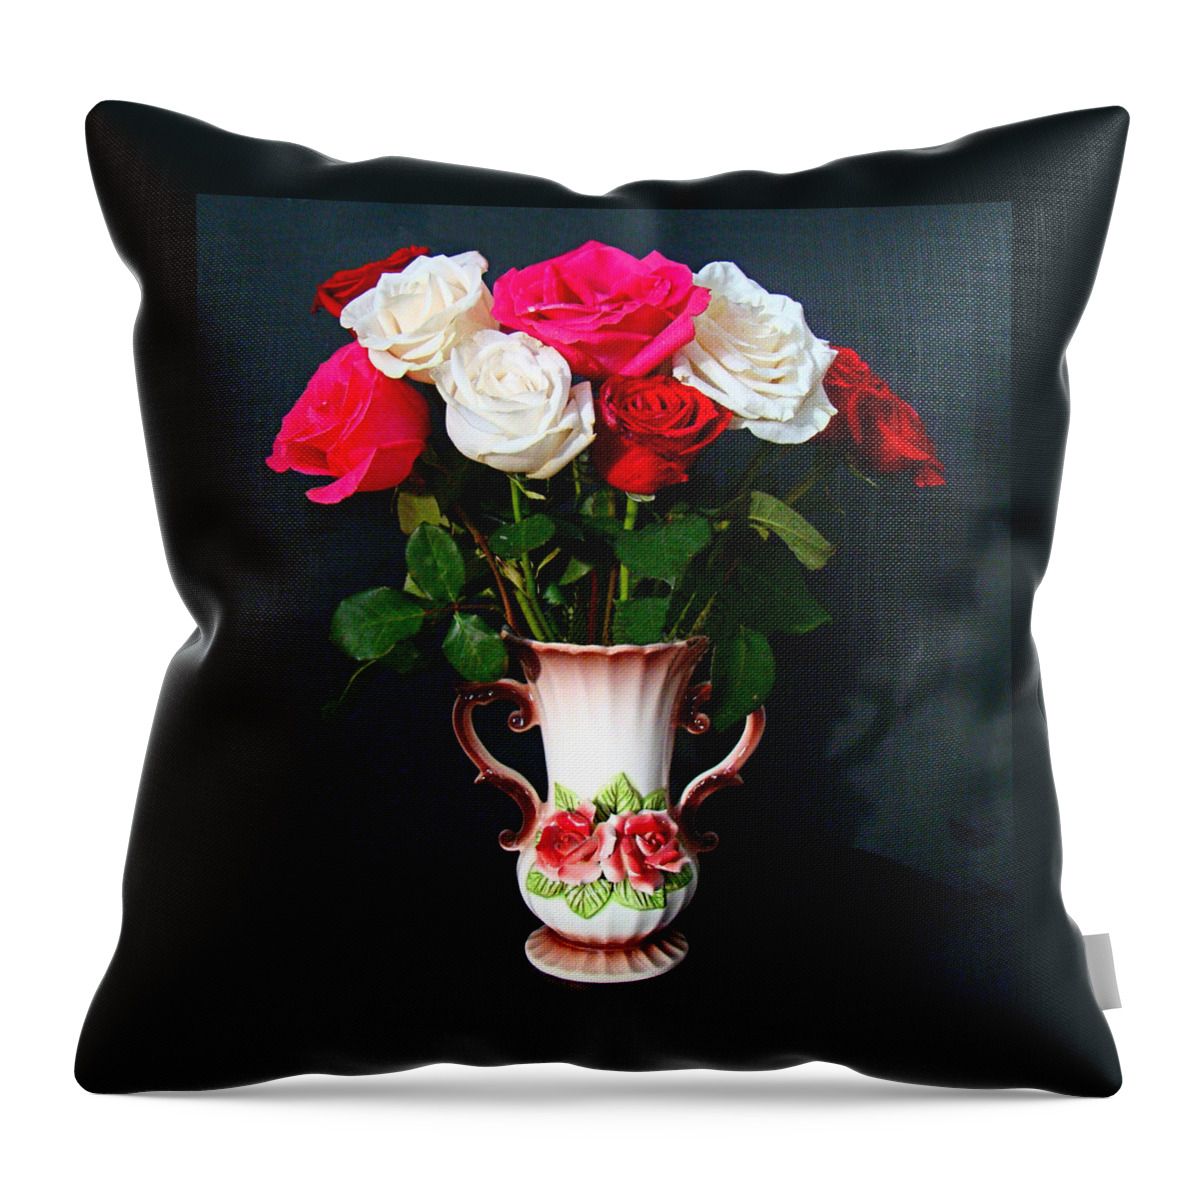 Vase Throw Pillow featuring the photograph Rose Vase by Nick Kloepping